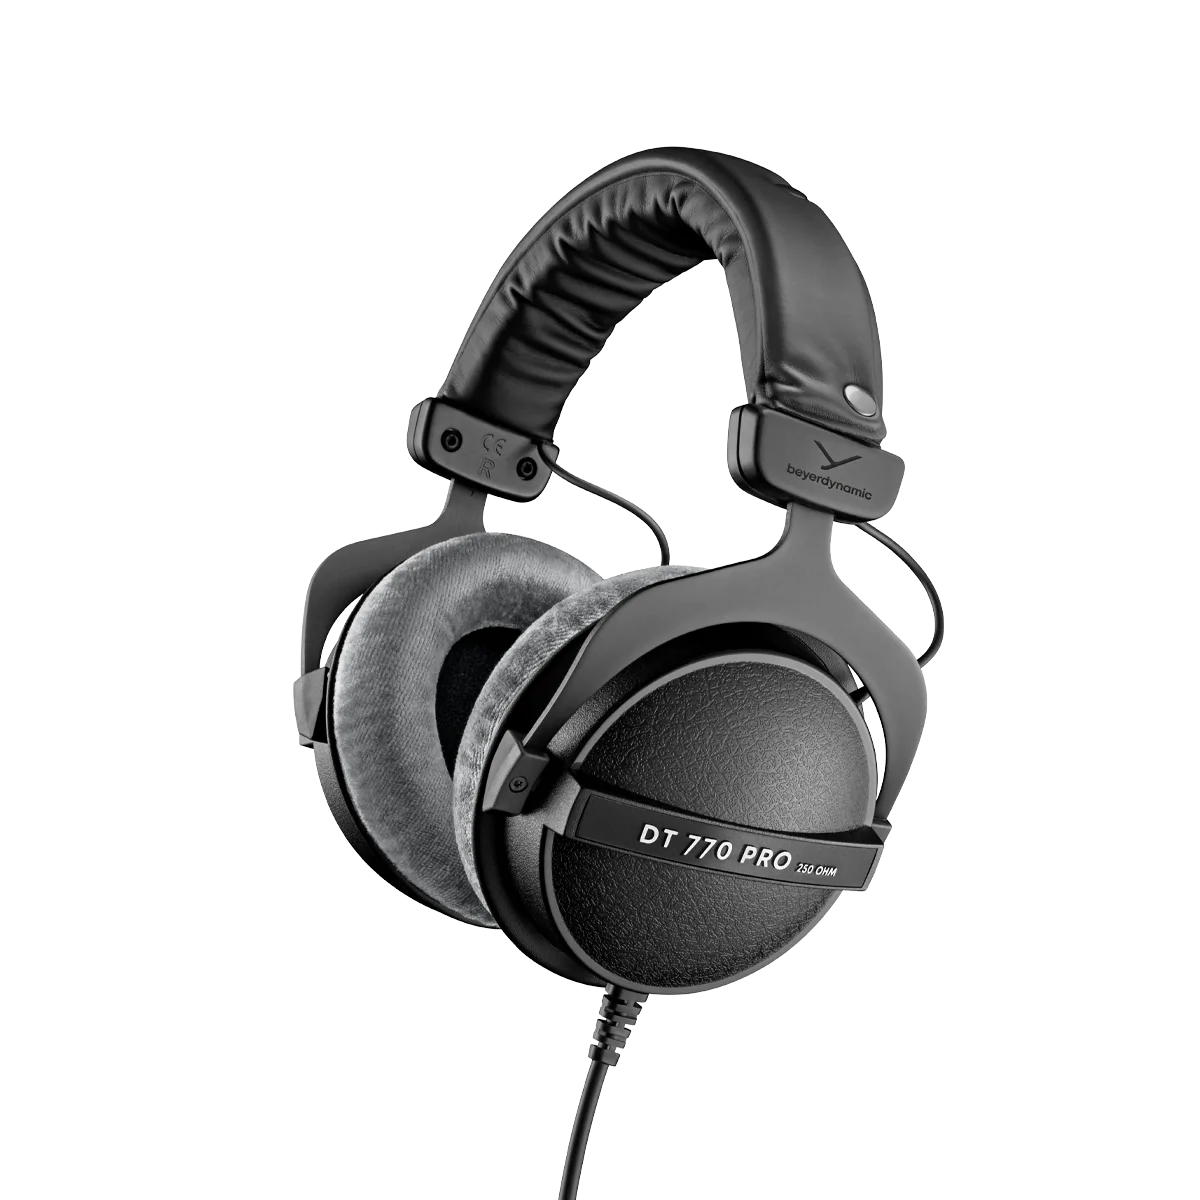 Best Headphones For Mixing and Mastering